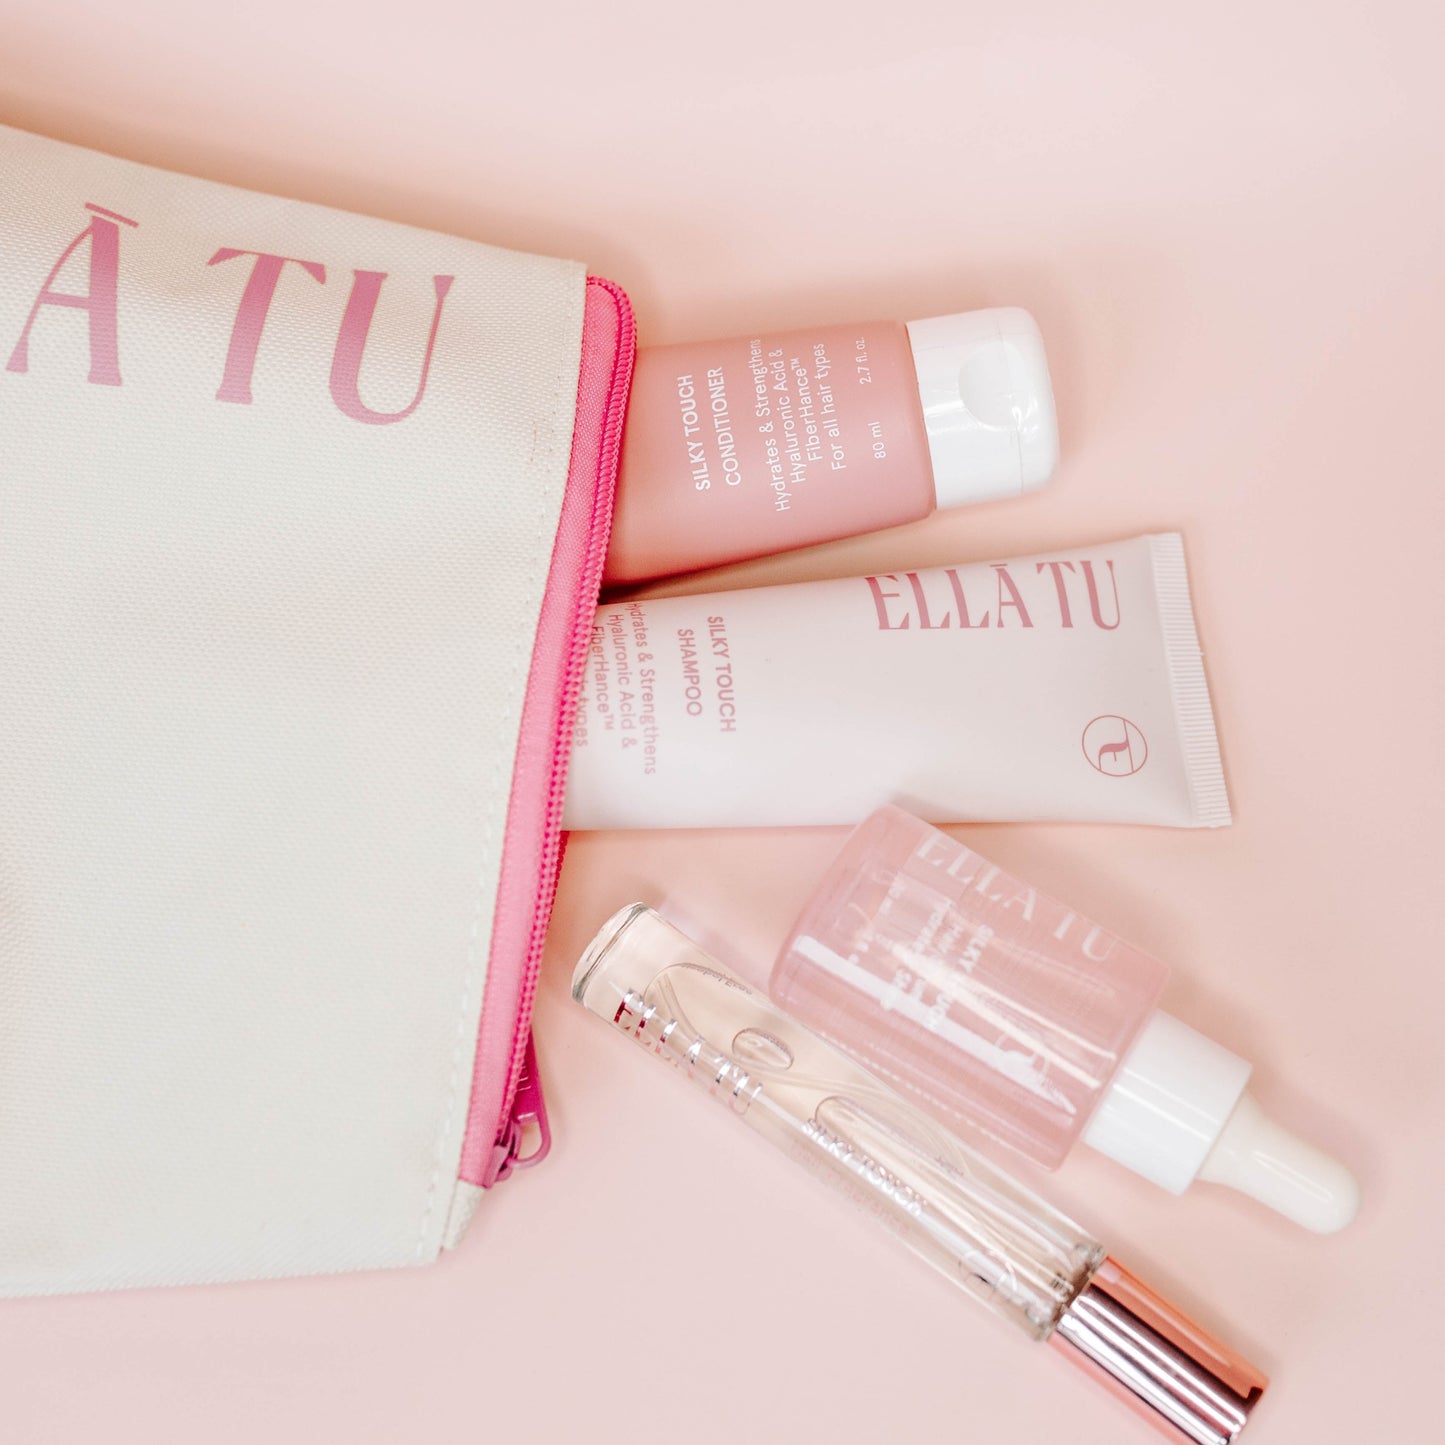 The Ellātu Travel Kit let's you bring your hair care on the go. All products are specially formulated for dry, damaged hair.